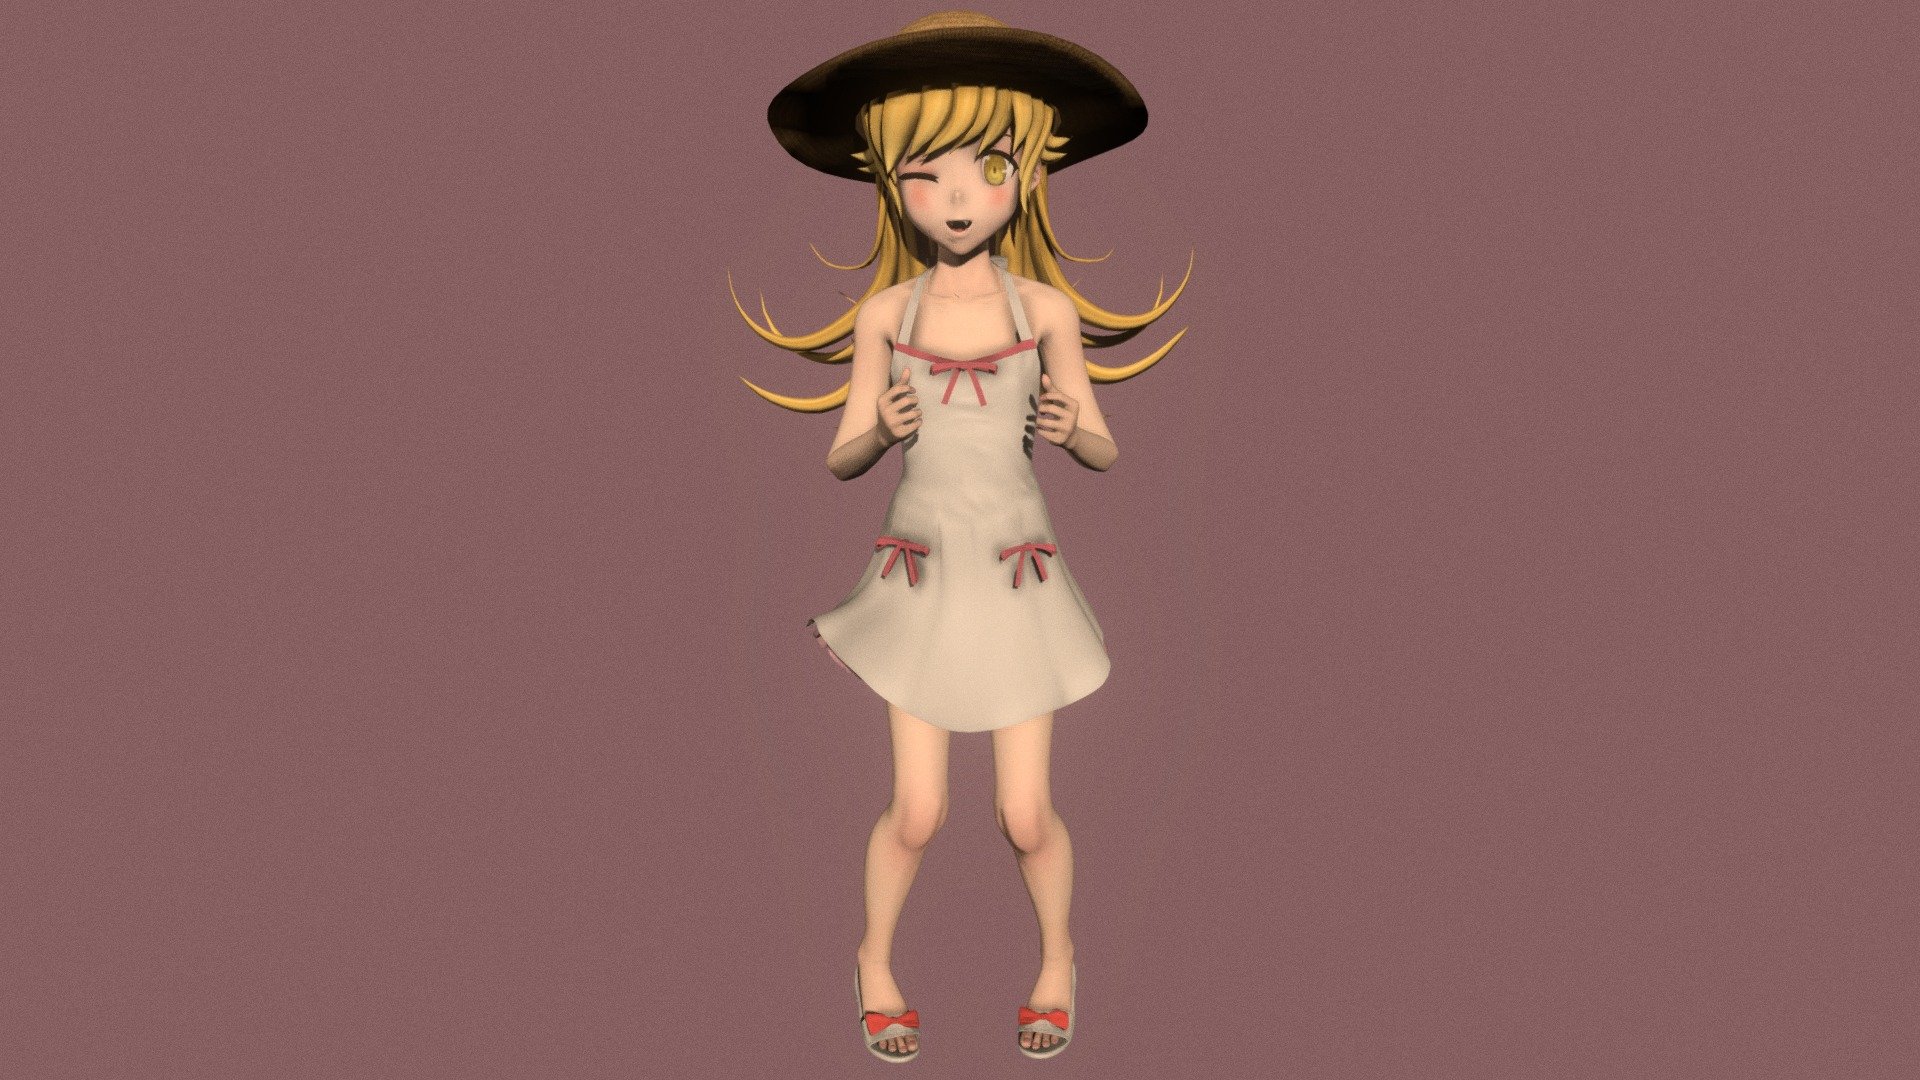 Posed model of anime girl Shinobu Oshino (Bakemonogatari).

This product include .FBX (ver. 7200) and .MAX (ver. 2010) files.

Rigged version: https://sketchfab.com/3d-models/t-pose-rigged-model-of-shinobu-oshino-992b6f6c7f0a40dc99fa12e273a440b5

I support convert this 3D model to various file formats: 3DS; AI; ASE; DAE; DWF; DWG; DXF; FLT; HTR; IGS; M3G; MQO; OBJ; SAT; STL; W3D; WRL; X.

You can buy all of my models in one pack to save cost: https://sketchfab.com/3d-models/all-of-my-anime-girls-c5a56156994e4193b9e8fa21a3b8360b

And I can make commission models.

If you have any questions, please leave a comment or contact me via my email 3d.eden.project@gmail.com 3d model